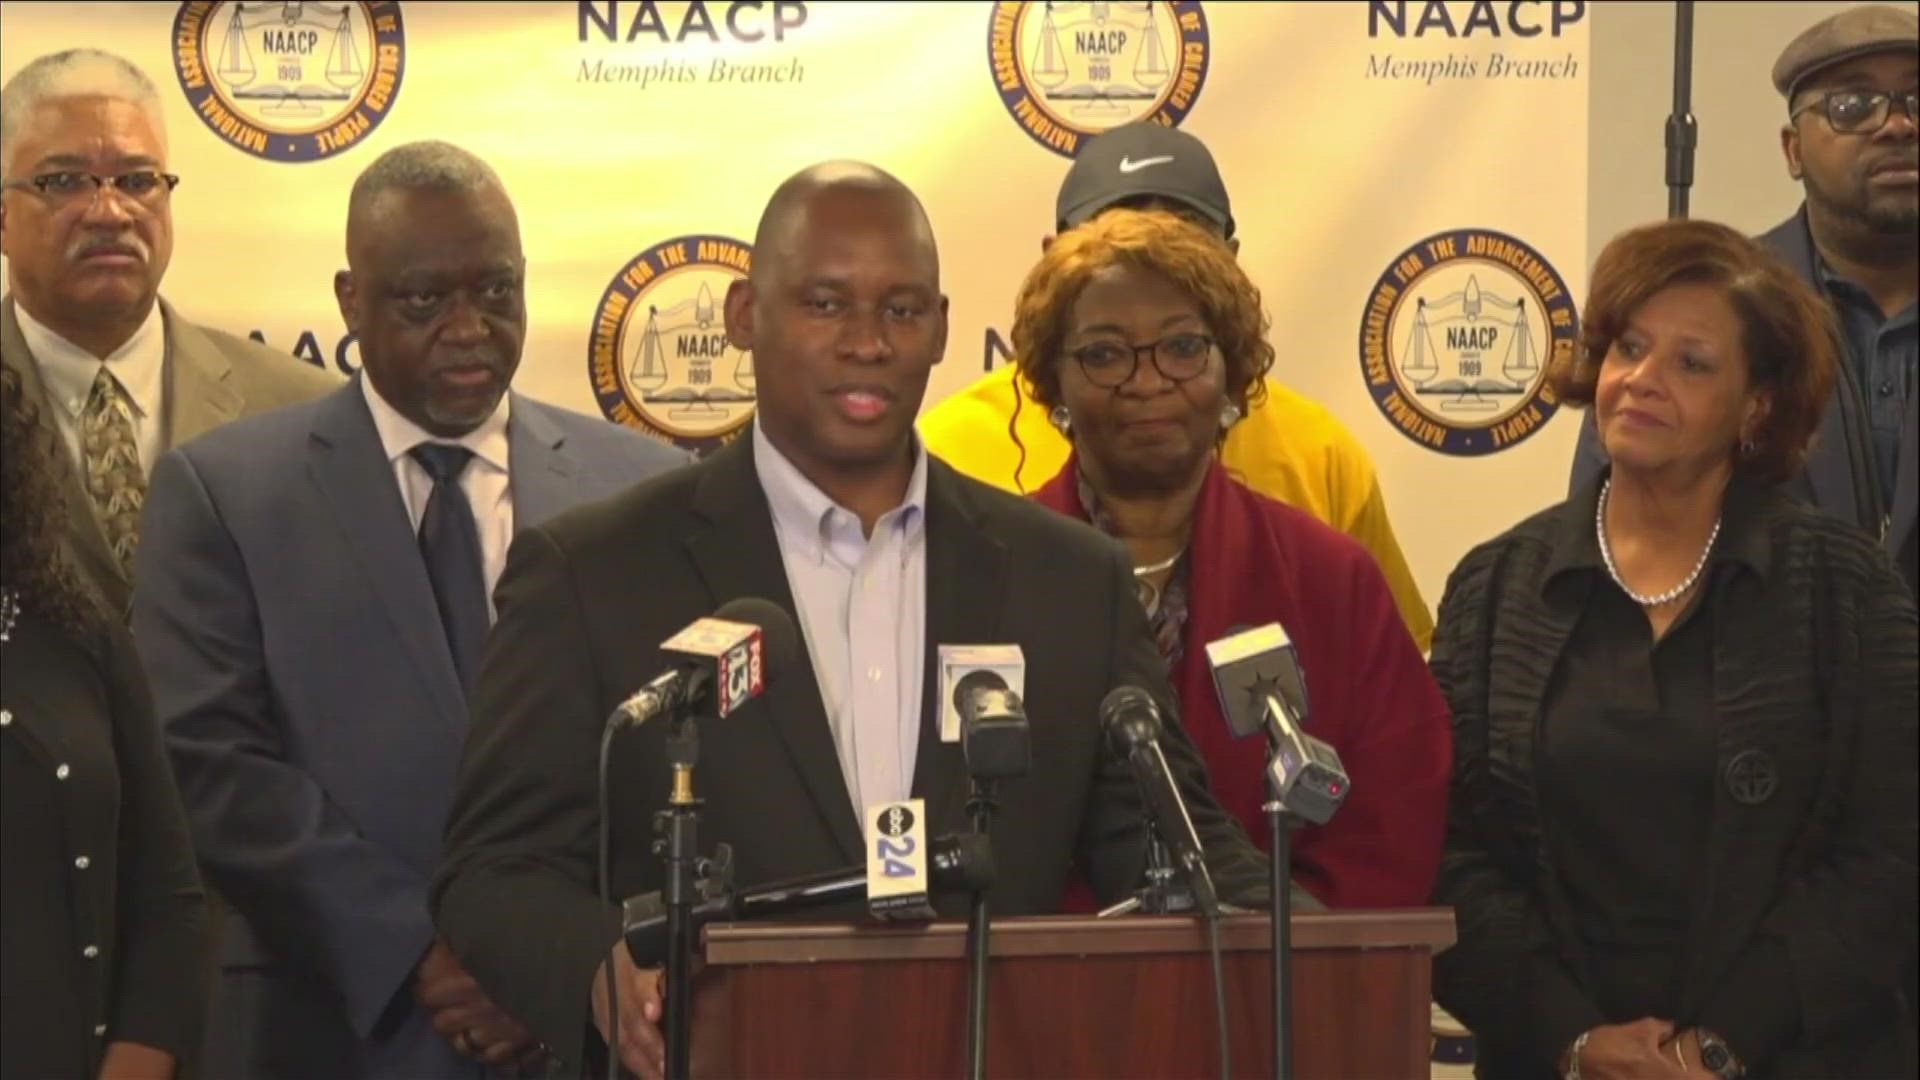 Hoping to pass the "Tyre Nichols Criminal Reform Bill," Van Turner and NAACP Memphis said they want the elimination of no-knock warrants as well as other changes.